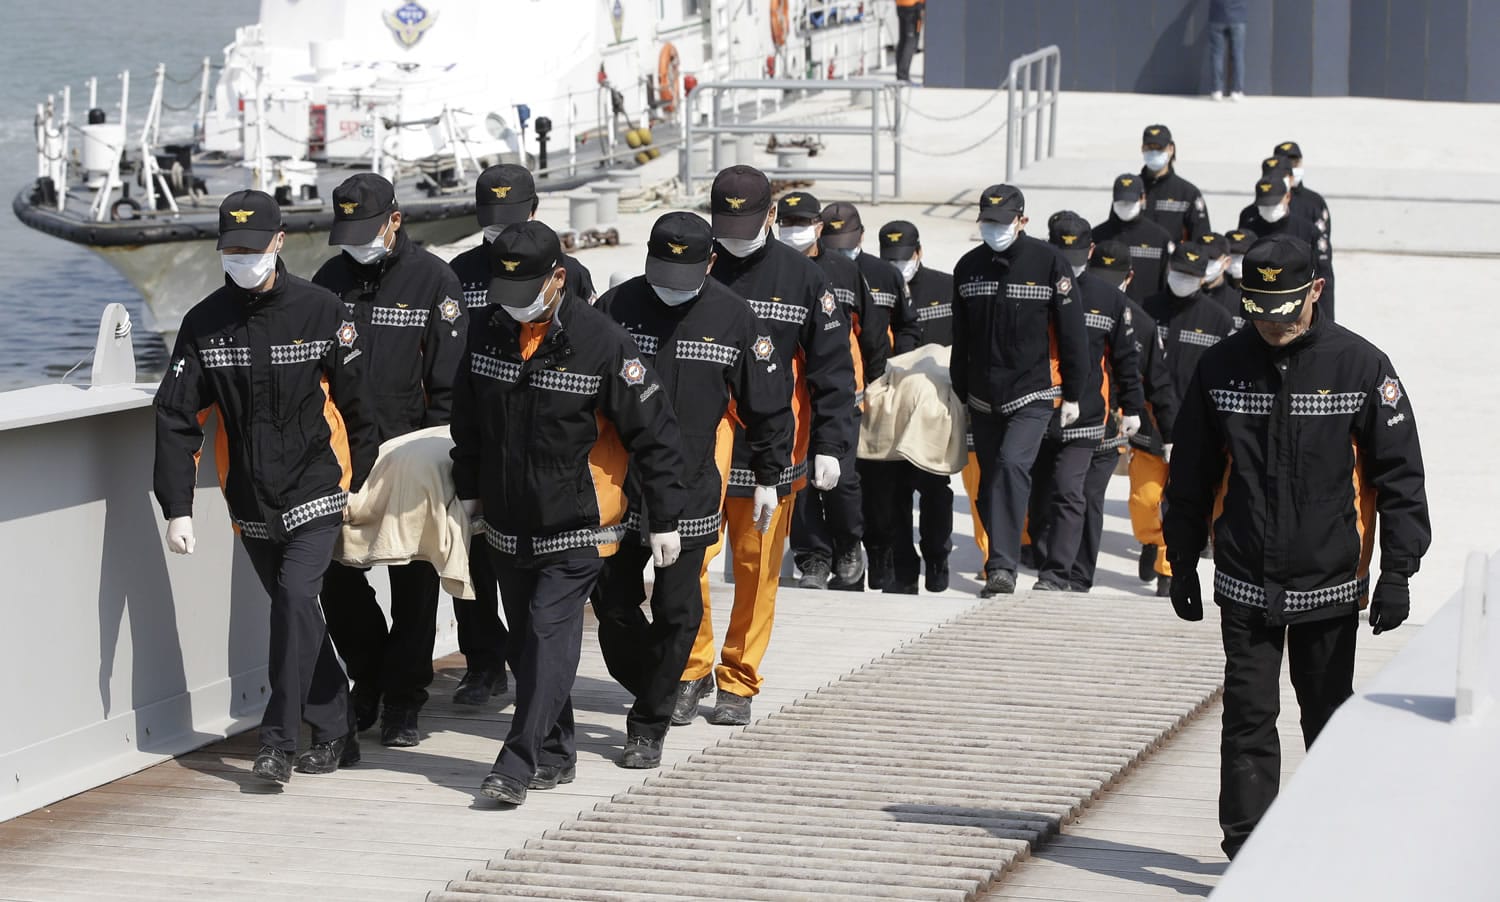 The bodies of passengers from the sunken ferry Sewol are carried by rescue workers upon their arrival today at a port in Jindo, South Korea.